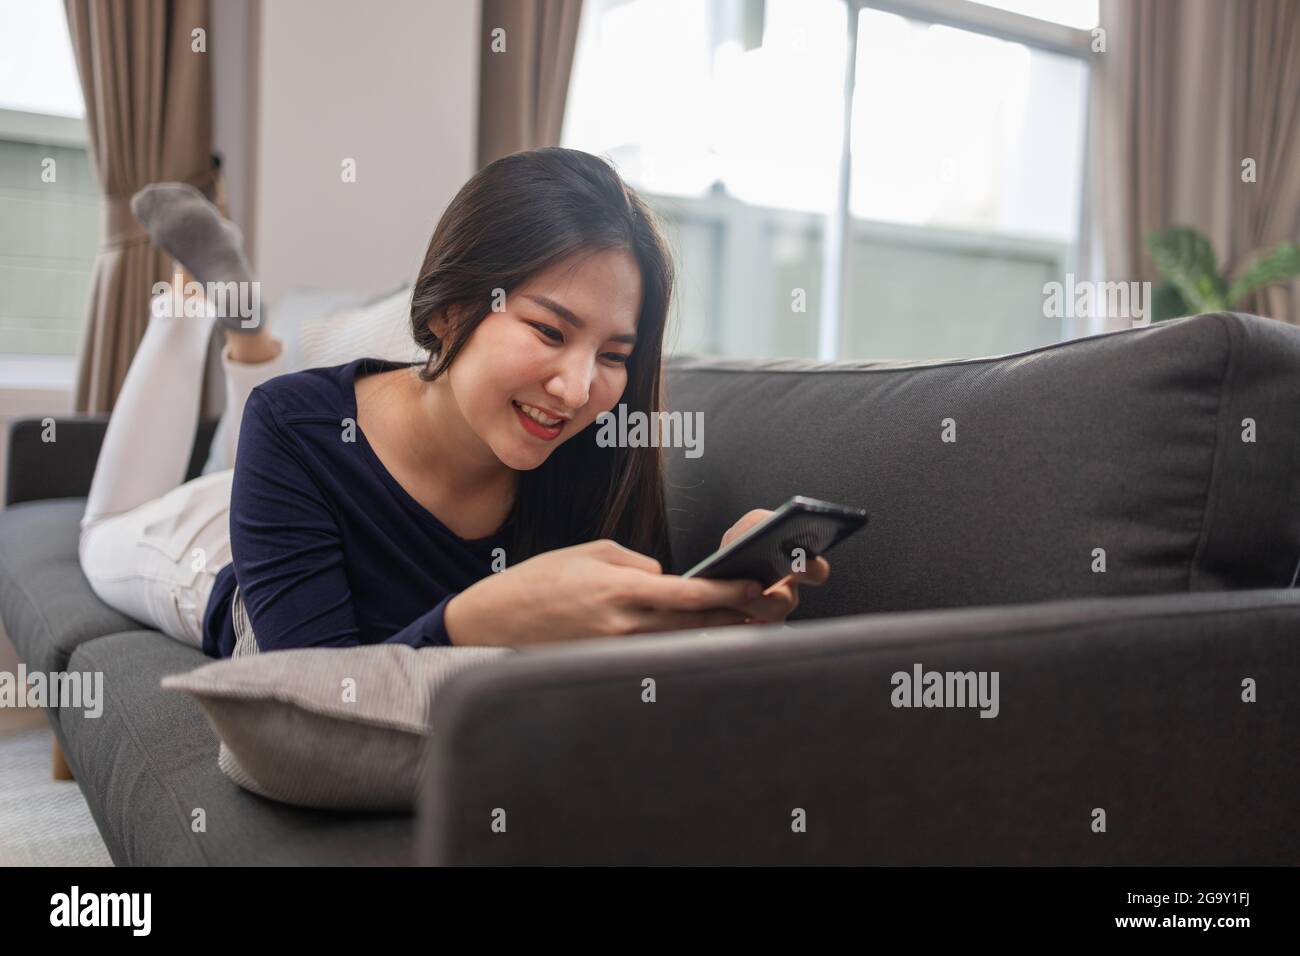 Work from home concept a young woman laying on a gray sofa in a living room surfing the internet. Stock Photo